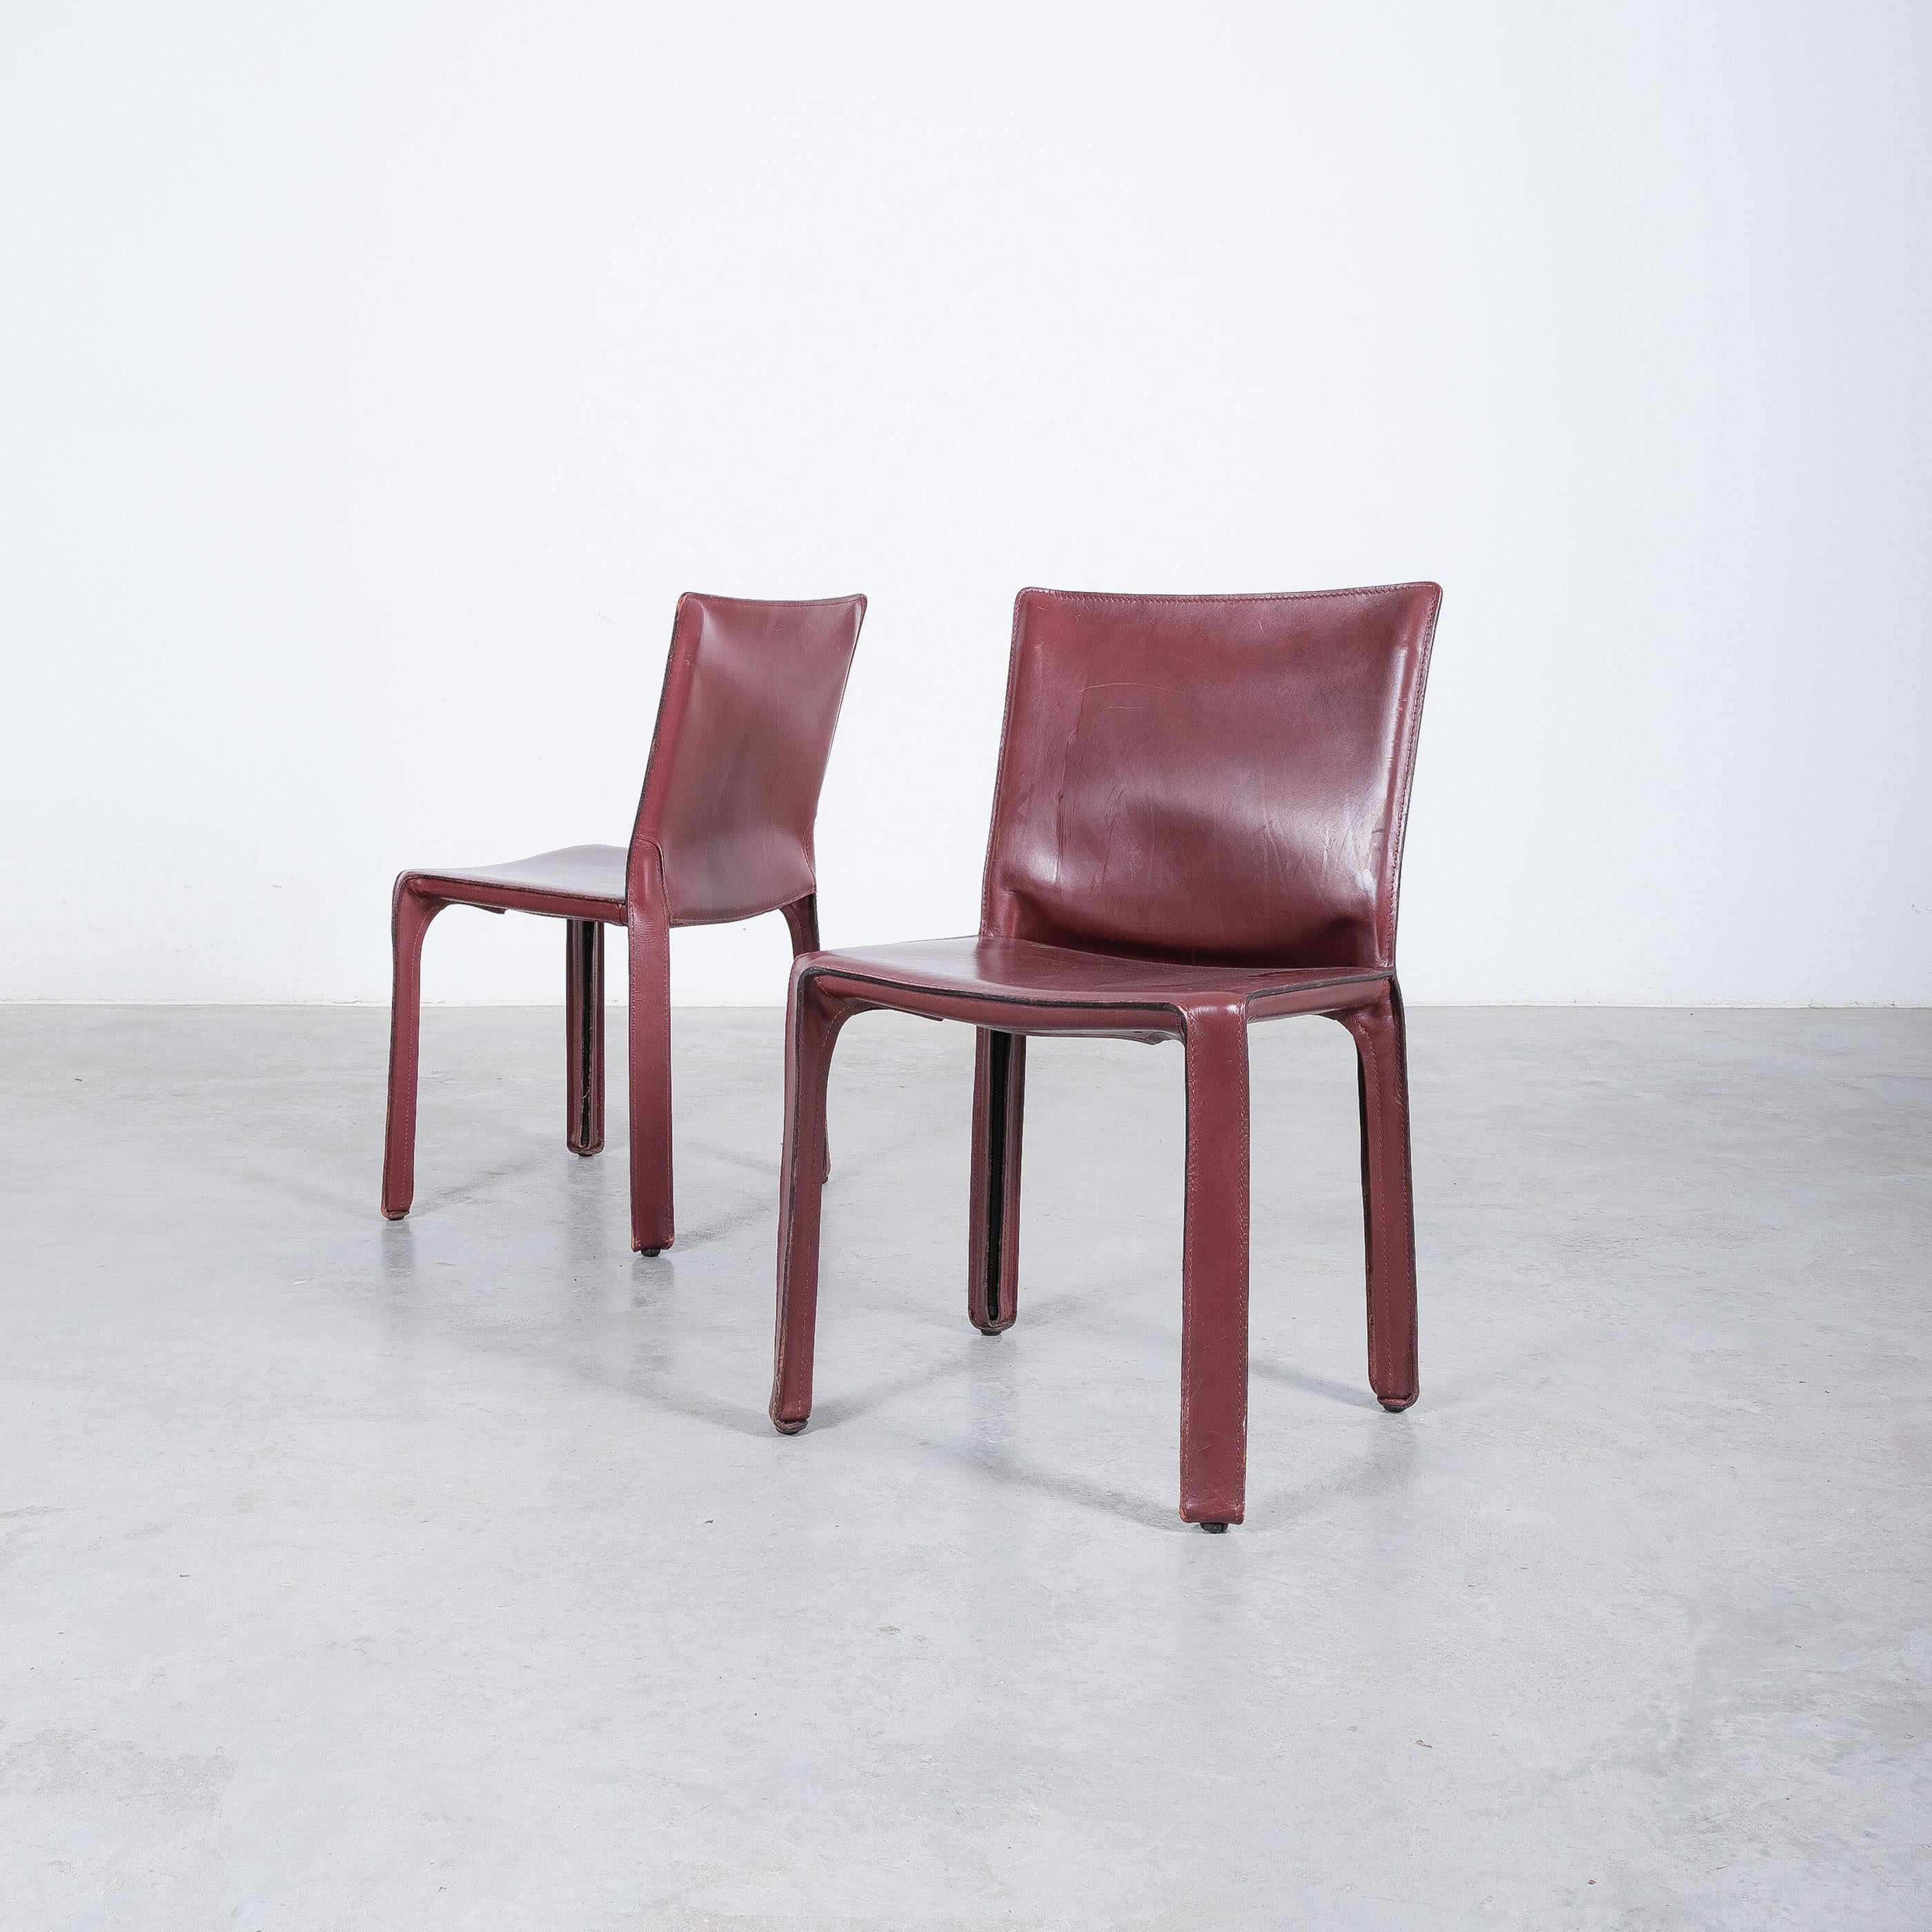 Mario Bellini Cassina Cab 412, 413 Set of Ten 9 Red Leather Dining Chairs 6